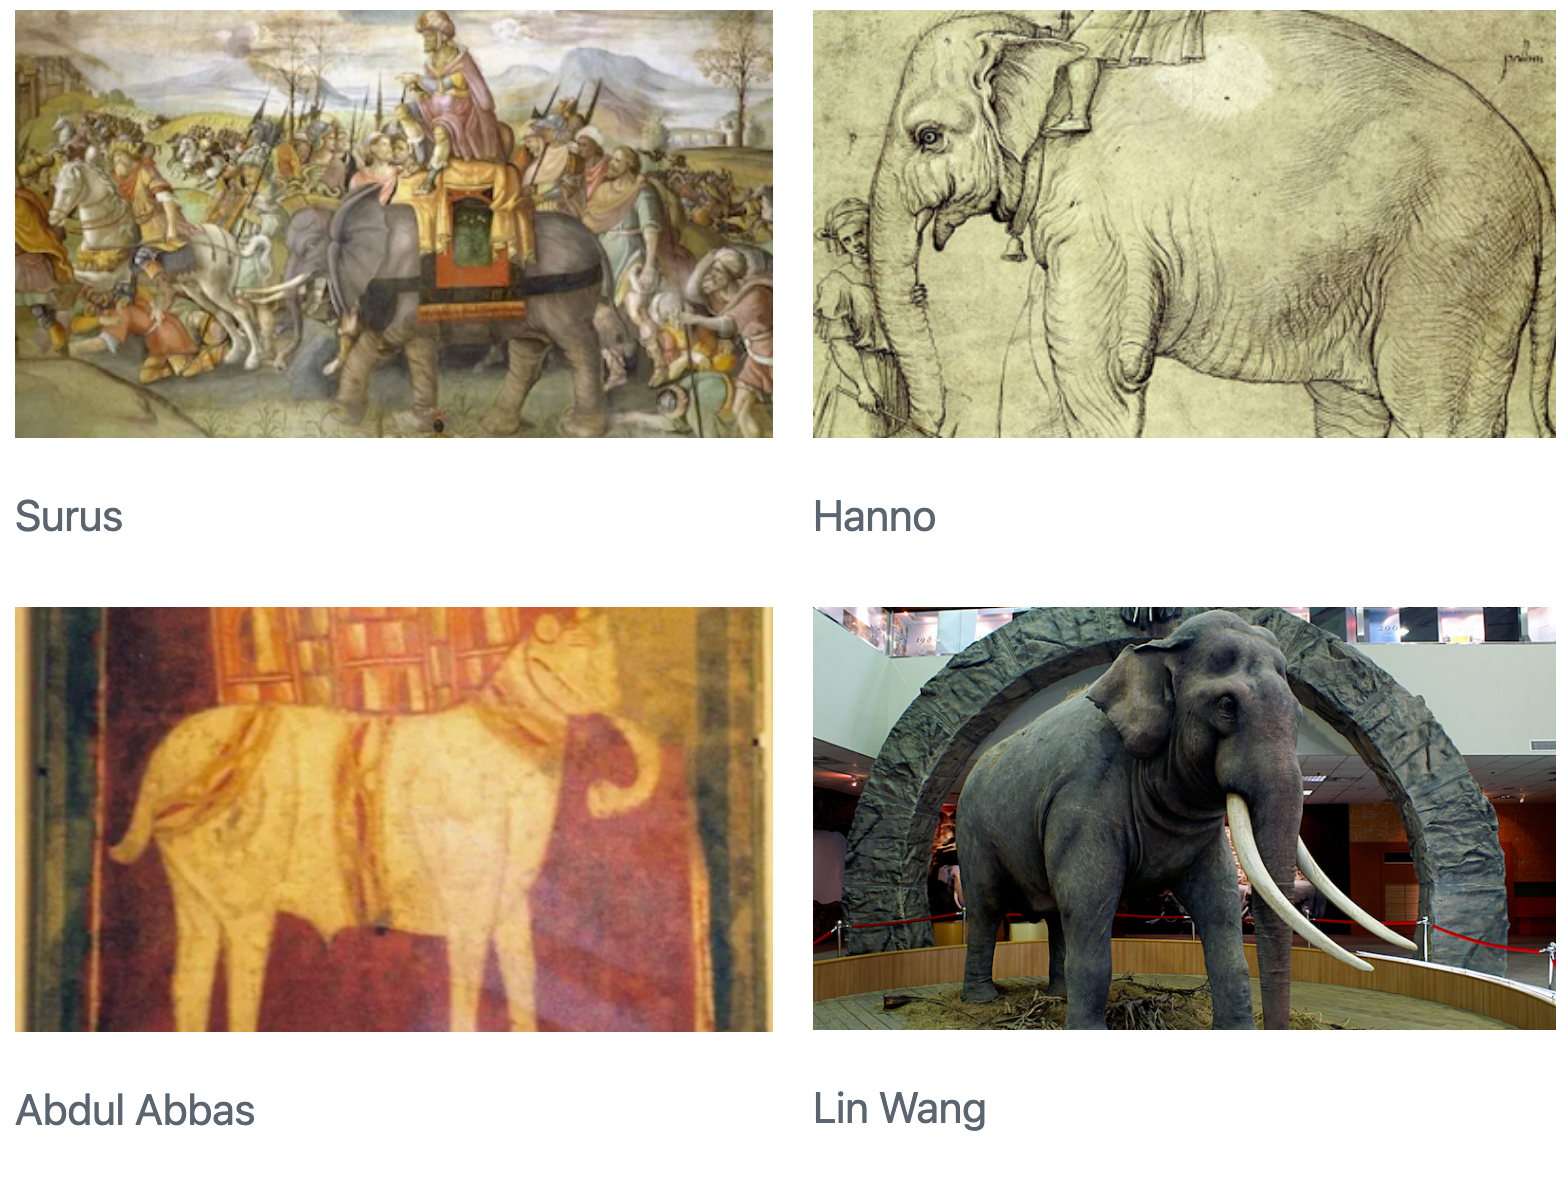 A 2x2 grid of pictures of elephants. There are labels underneath each of the pictures. Clockwise from the upper left, the labels say: Surus, Hanno, Lin Wang, and Abdul Abbas.